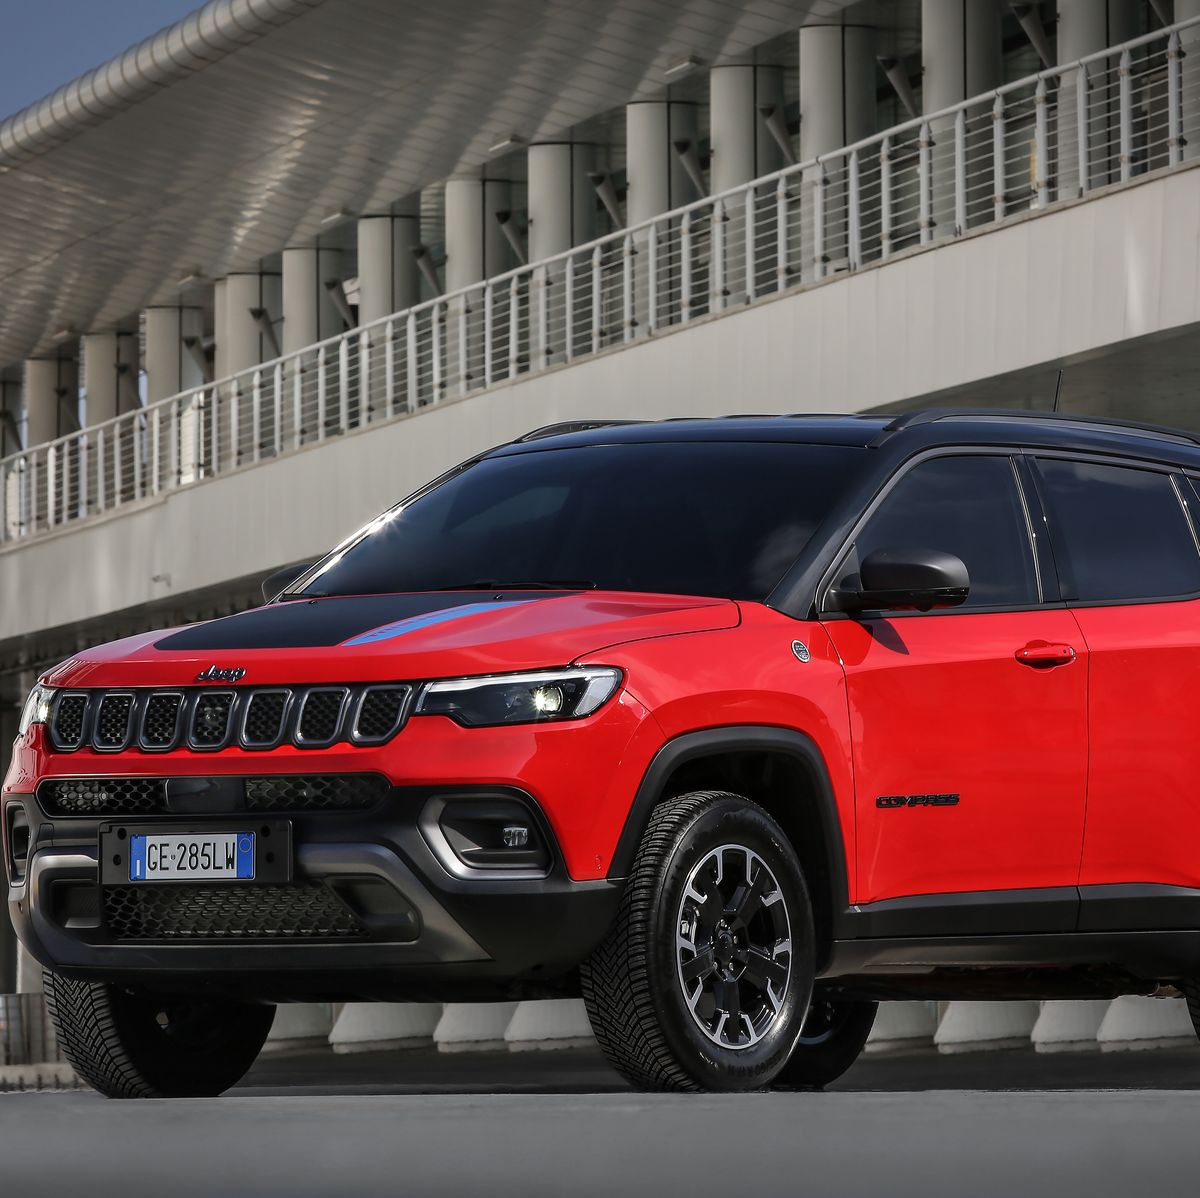 2022 Jeep Compass Will Have a Nicer, More Modern Interior